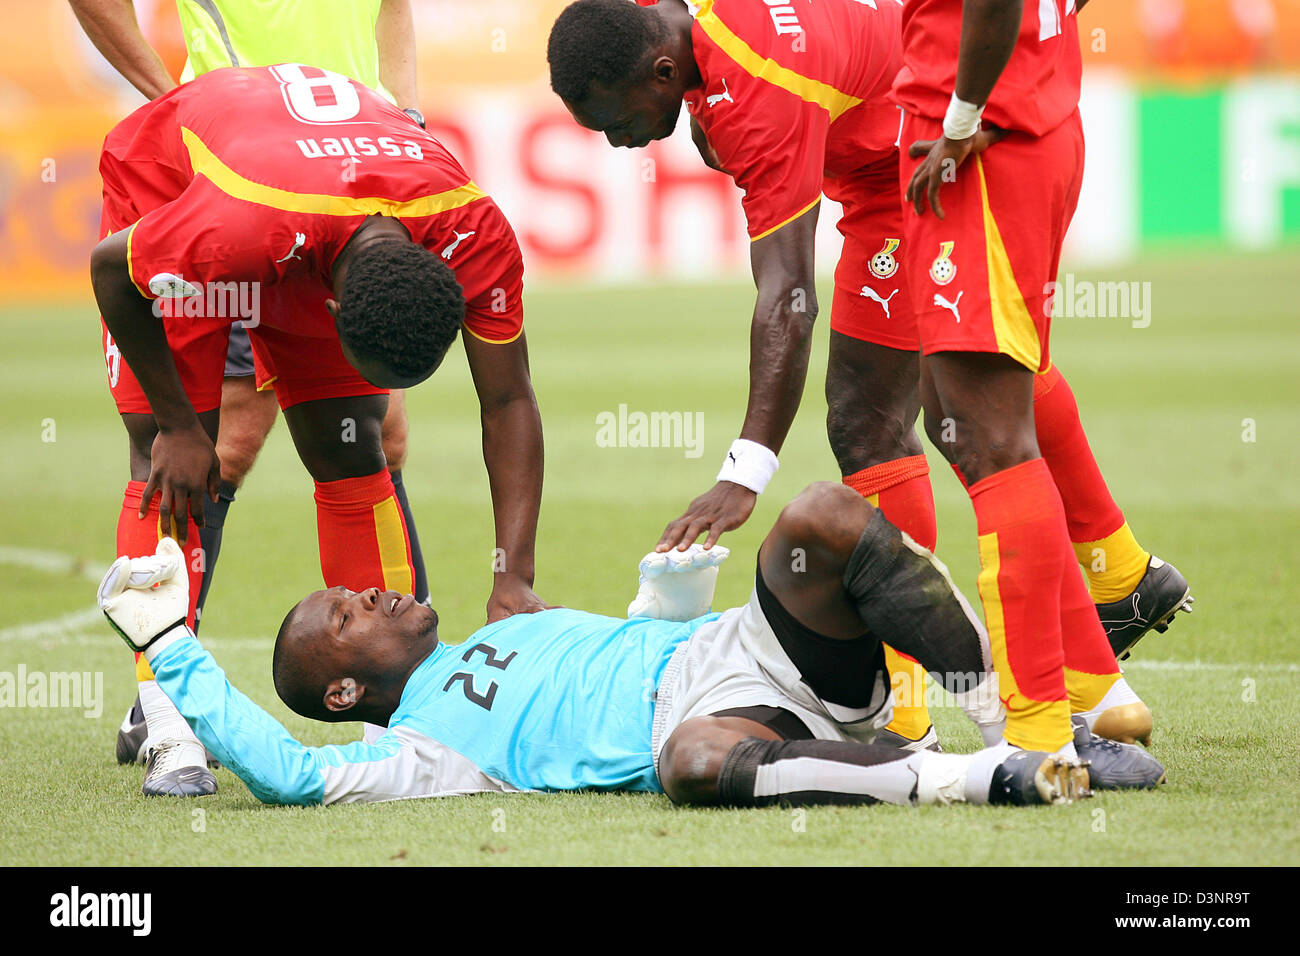 Goalkeeper Richard Kingson of Ghana is injured during the group E preliminary round match of the 2006 FIFA World Cup between Ghana and USA in Nuremberg, Germany, Thursday 22 June 2006. DPA/PETER KNEFFEL +++ Mobile Services OUT +++ Please also refer to FIFA's Terms and Conditions. Stock Photo